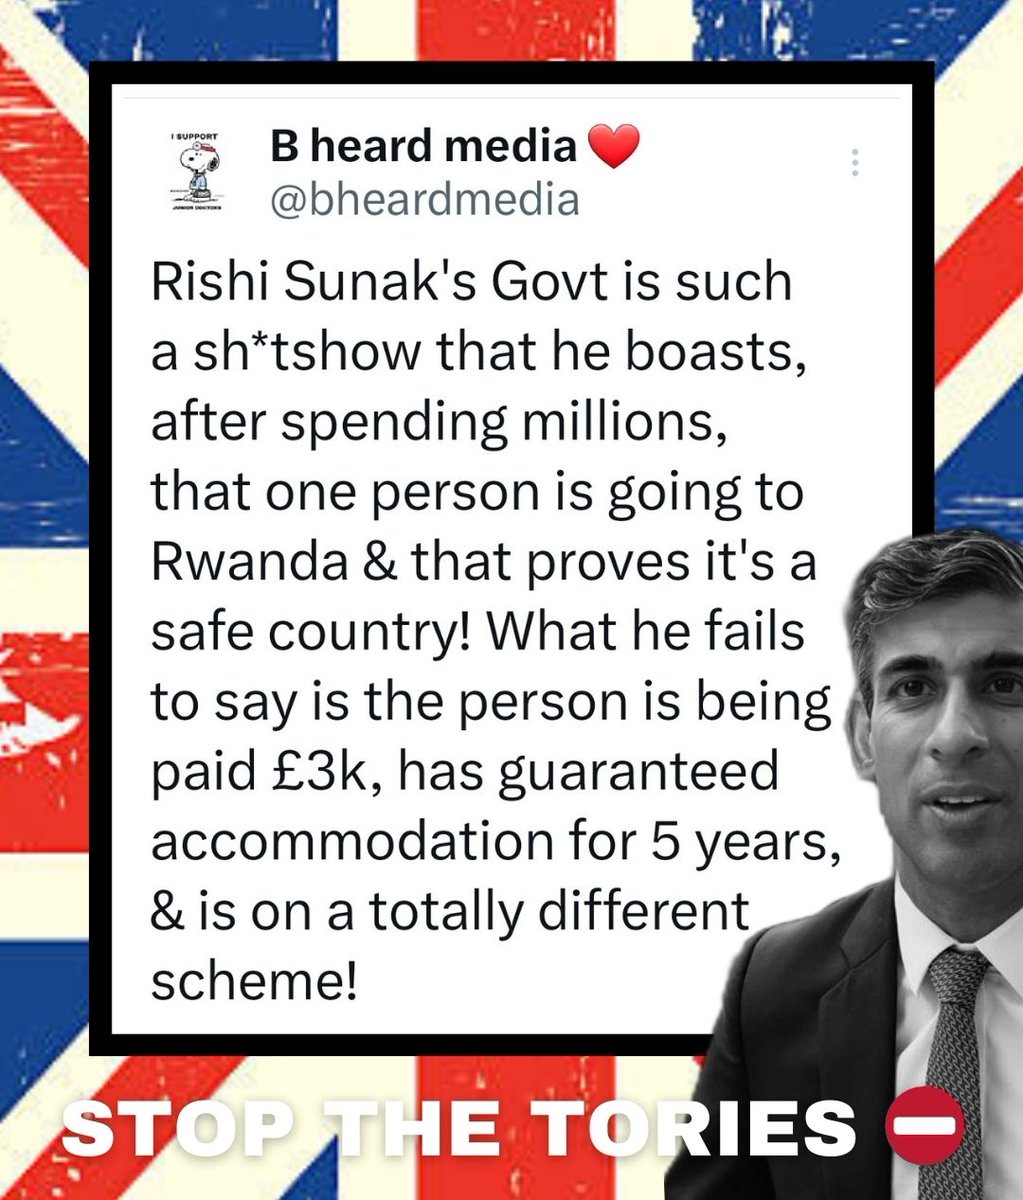 Rishi Sunak's Govt is such a sh*tshow that he boasts, after spending millions, that one person is going to Rwanda & that proves it's a safe country! What he fails to say is the person is being paid £3k, has guaranteed accommodation for 5 years, & is on a totally different scheme!